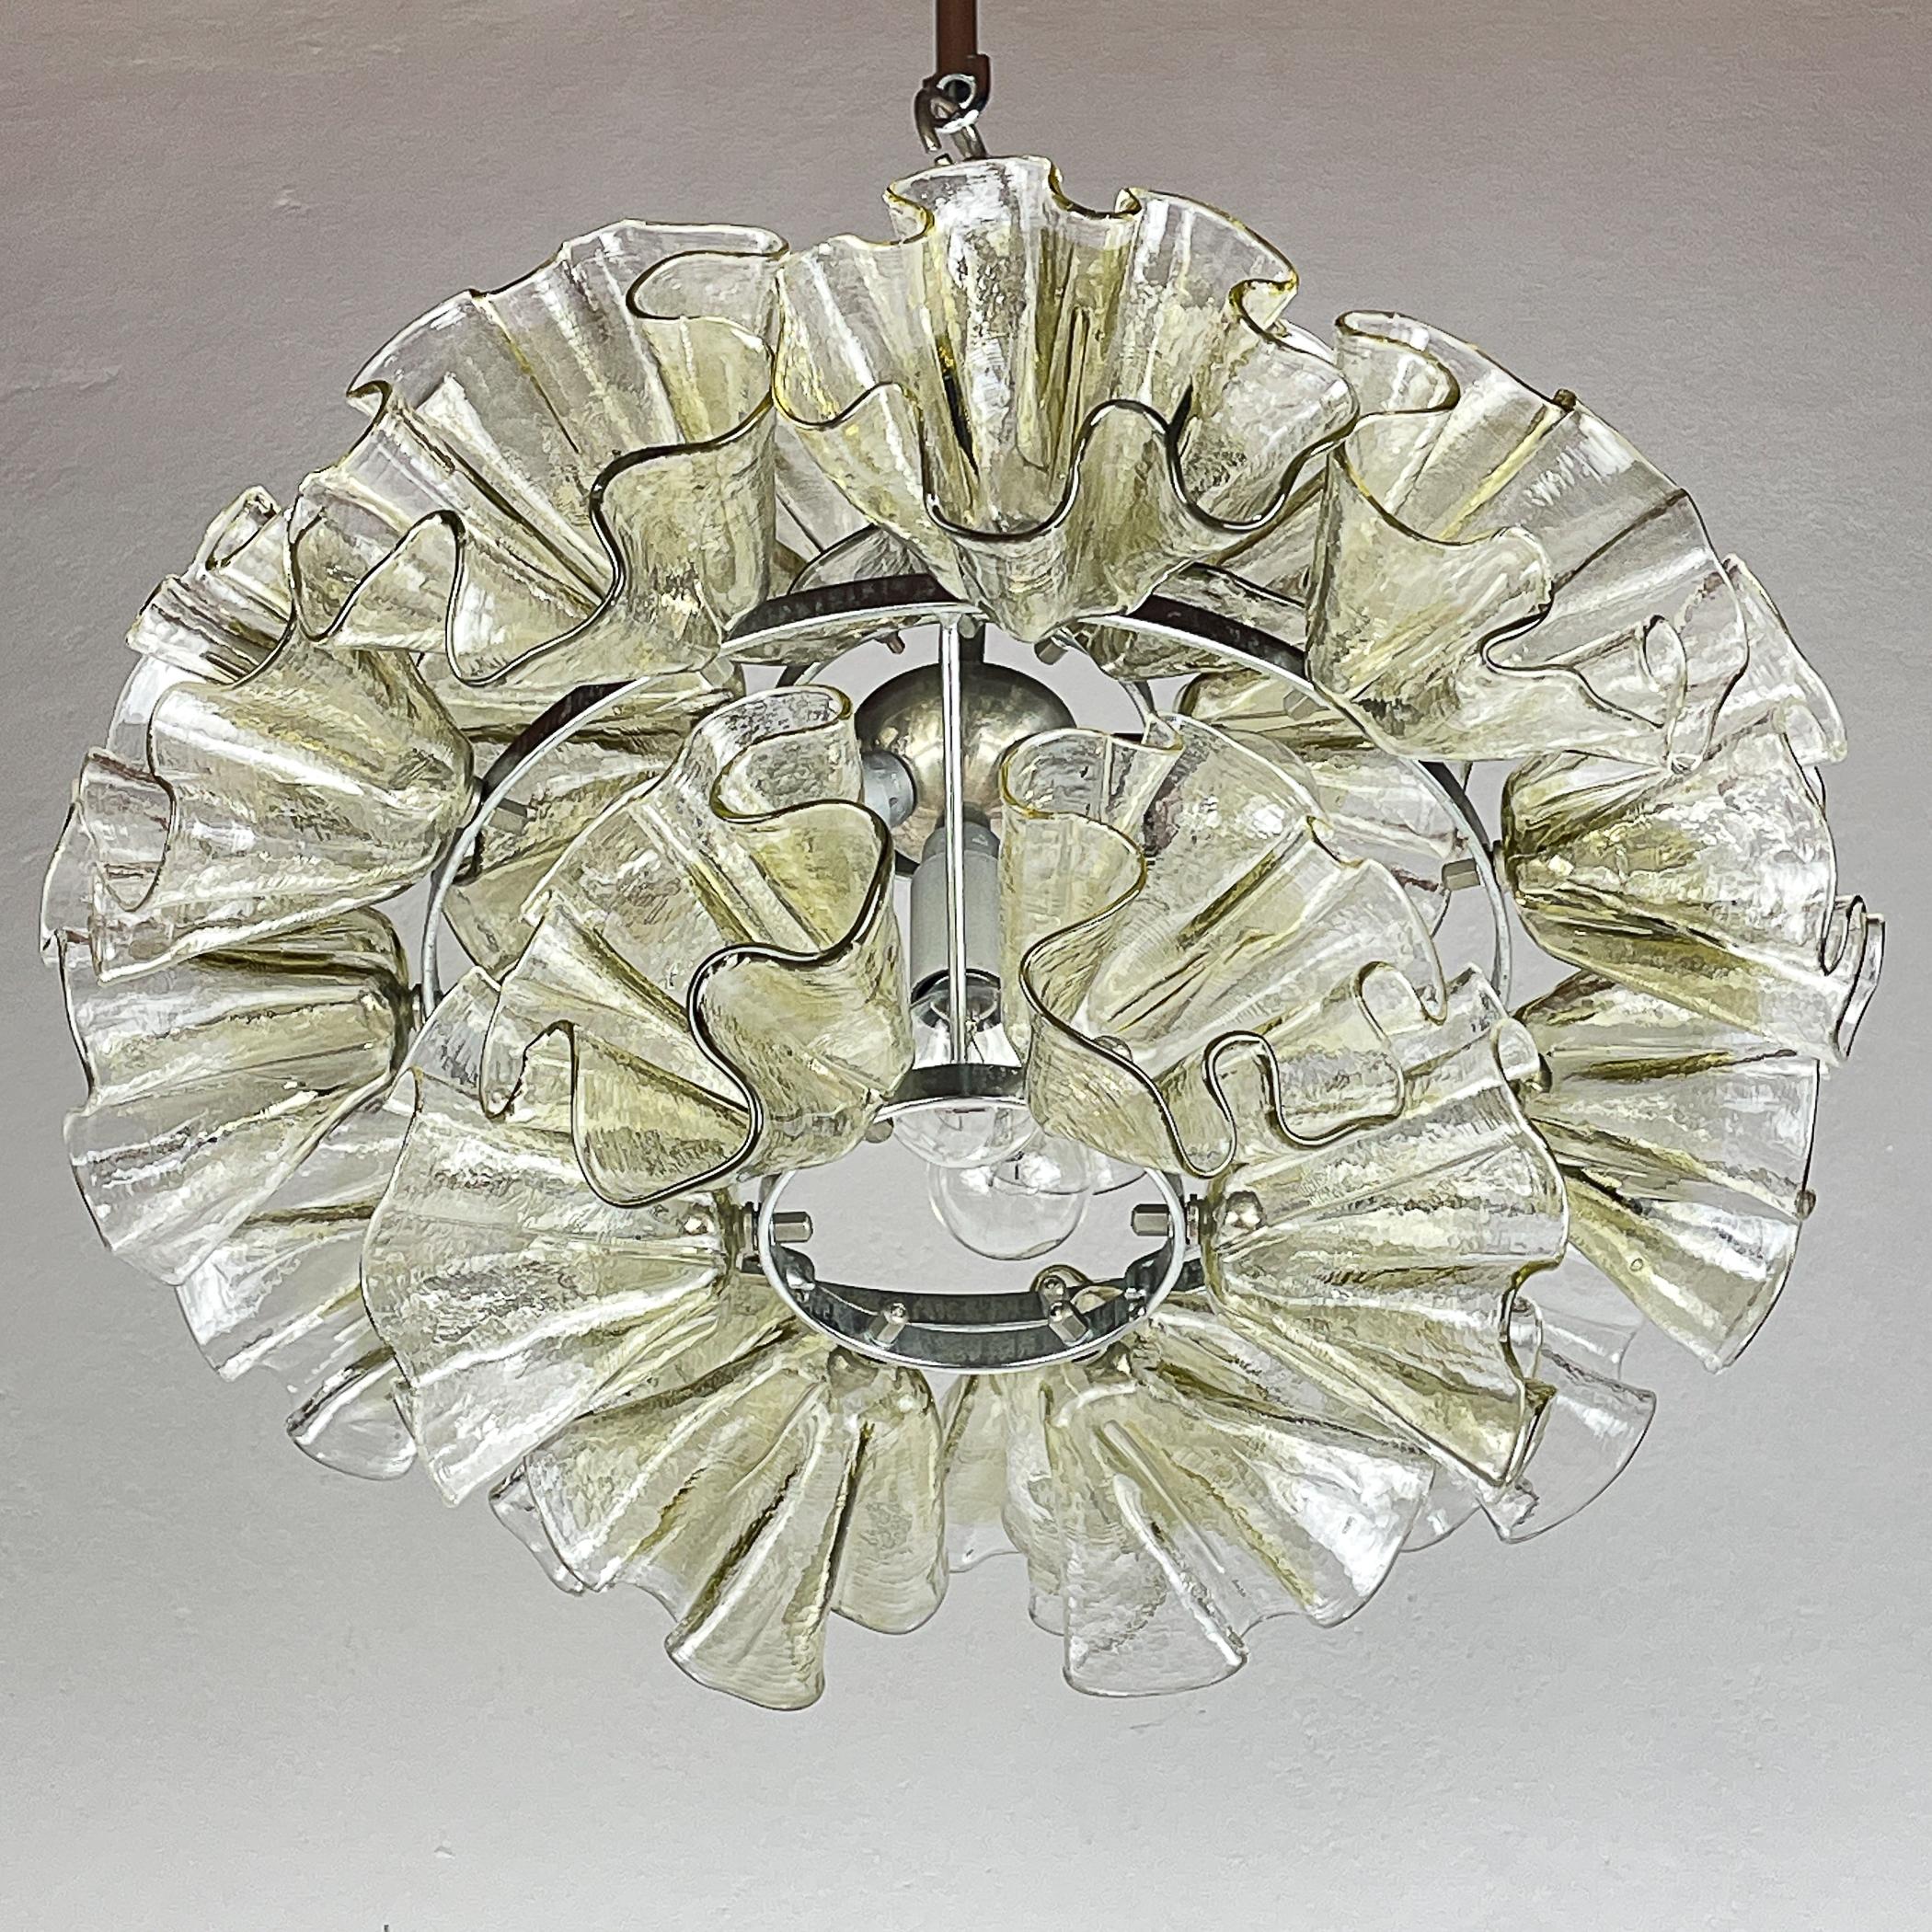 Introducing a mesmerizing Murano chandelier crafted by Mazzega in Italy during the 1970s, representing the epitome of mid-century modern Italian lighting. This exquisite chandelier features 23 meticulously handcrafted flower-shaped elements, each